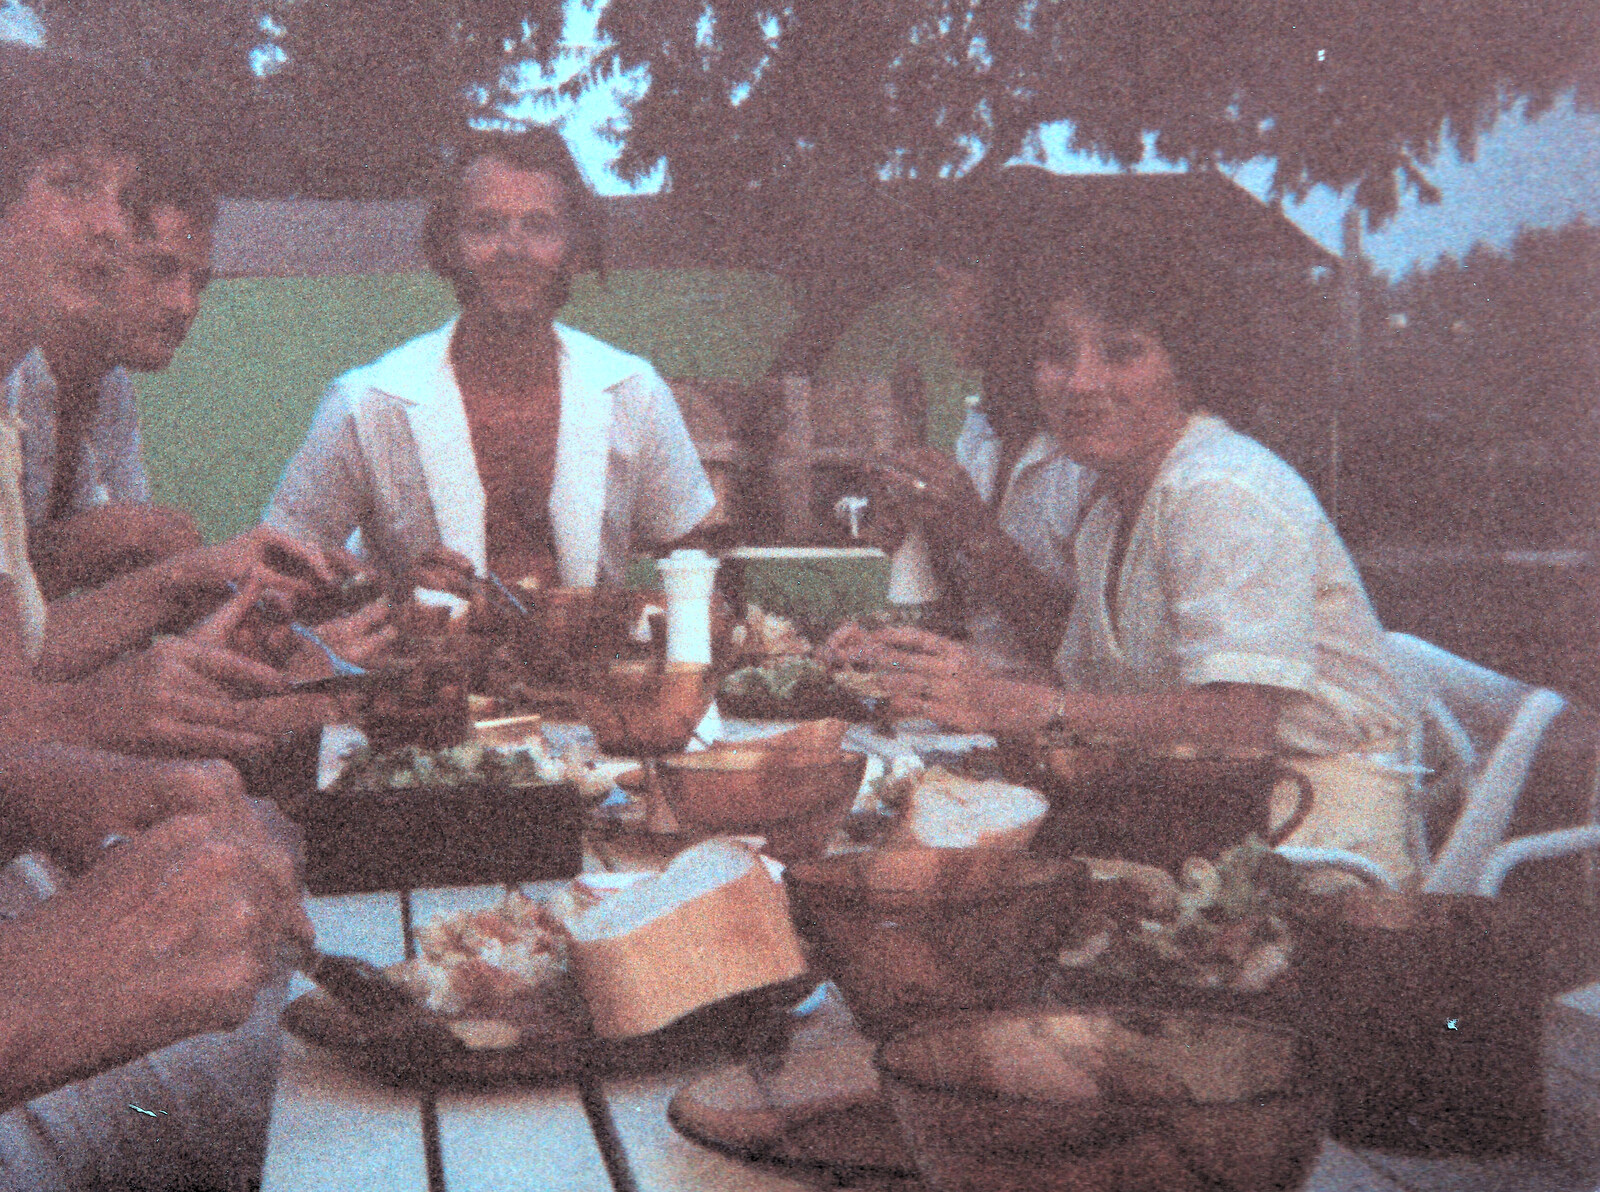 Bread and barbeque with Dave's family from Camping with Sean, The Camargue, South of France, 15th July 1982